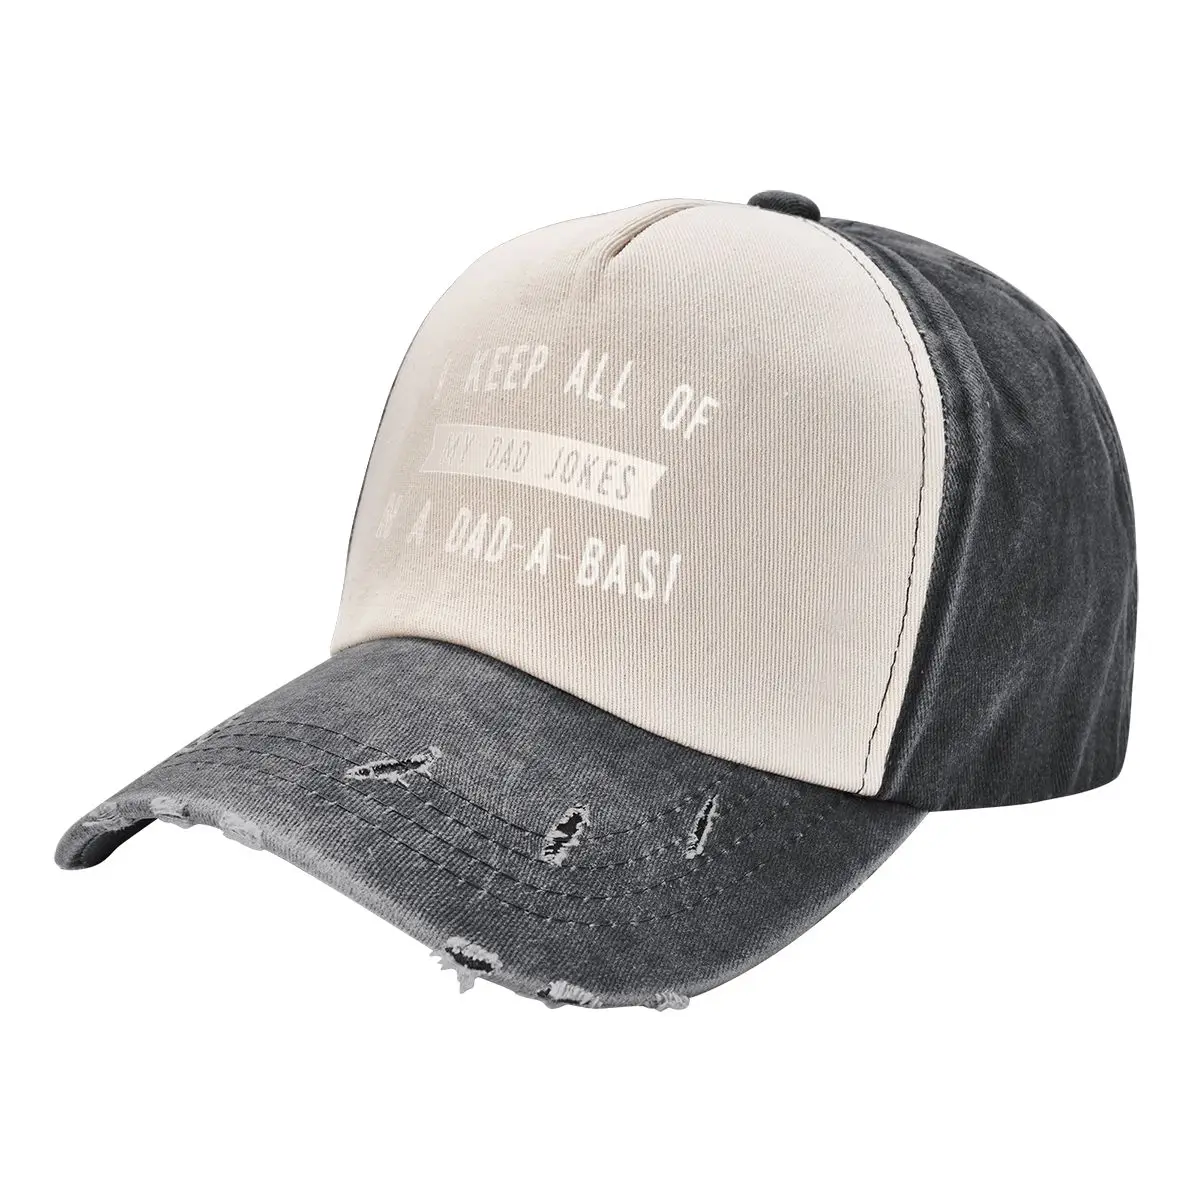 

I Keep All of my Jokes in a Dad-a-base - Funny Fathers Day Dad Joke Baseball Cap Beach Bag tea Hat Men's Women's